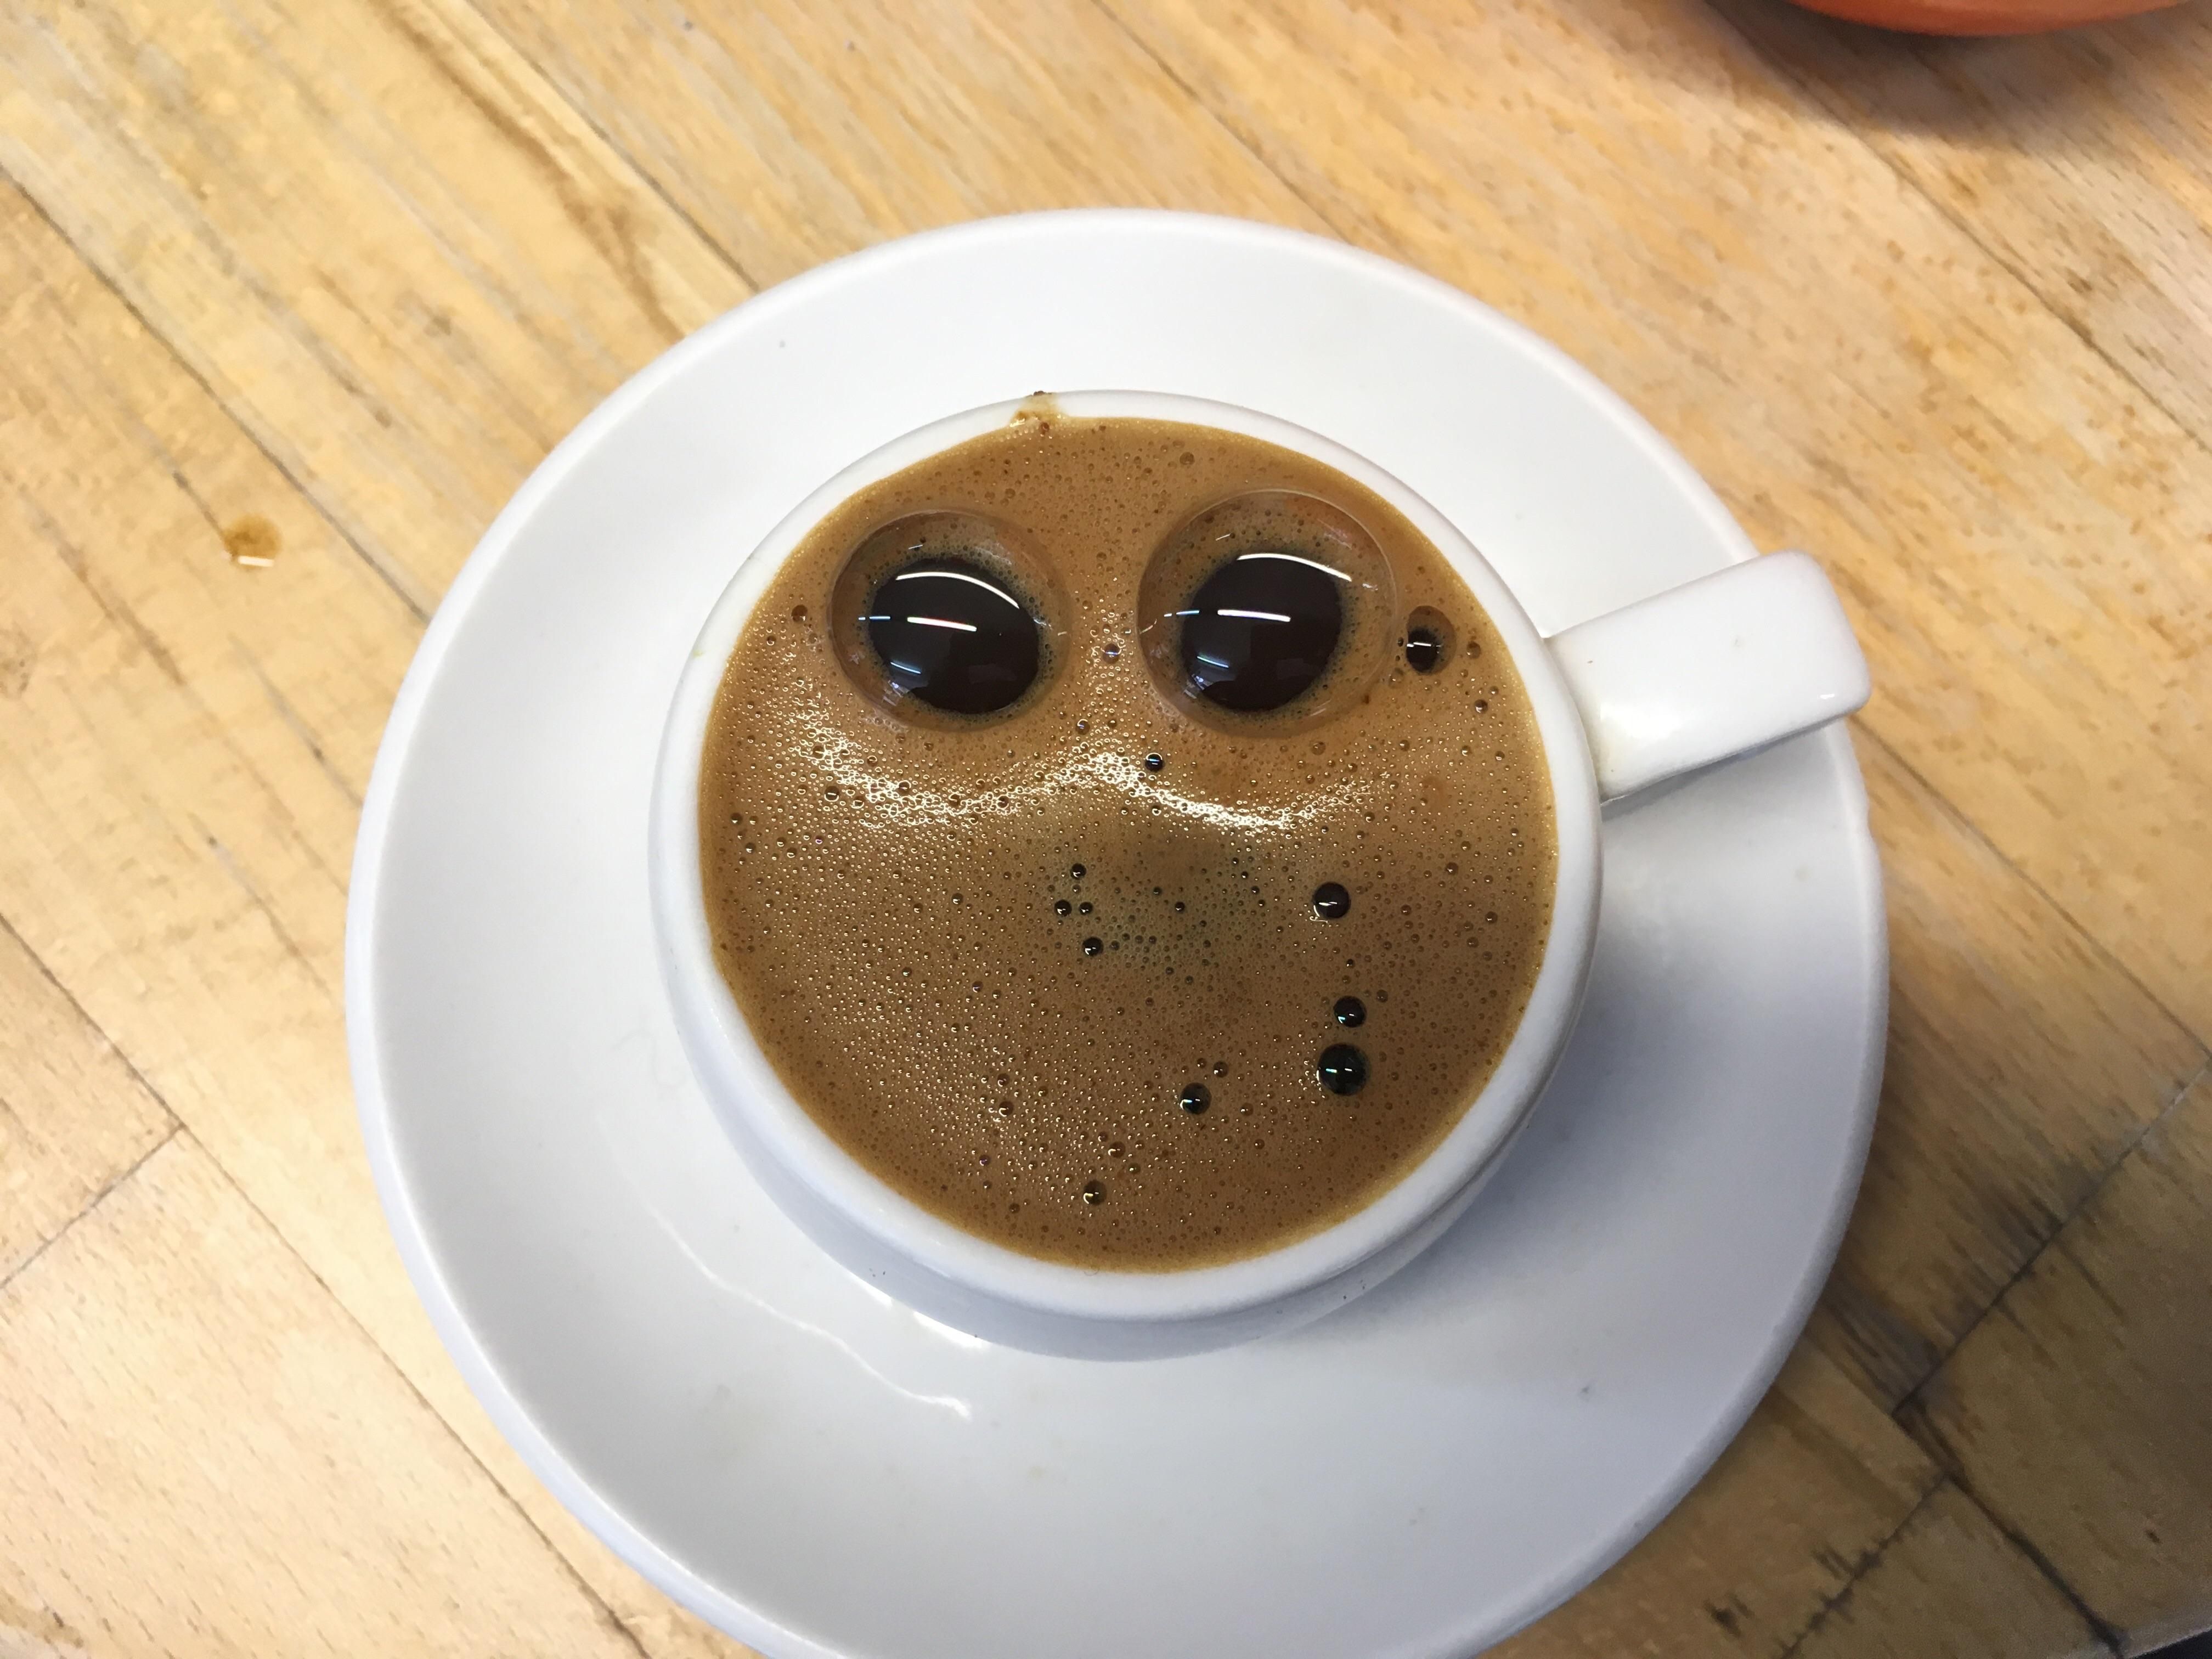 Today my coffee was staring at me